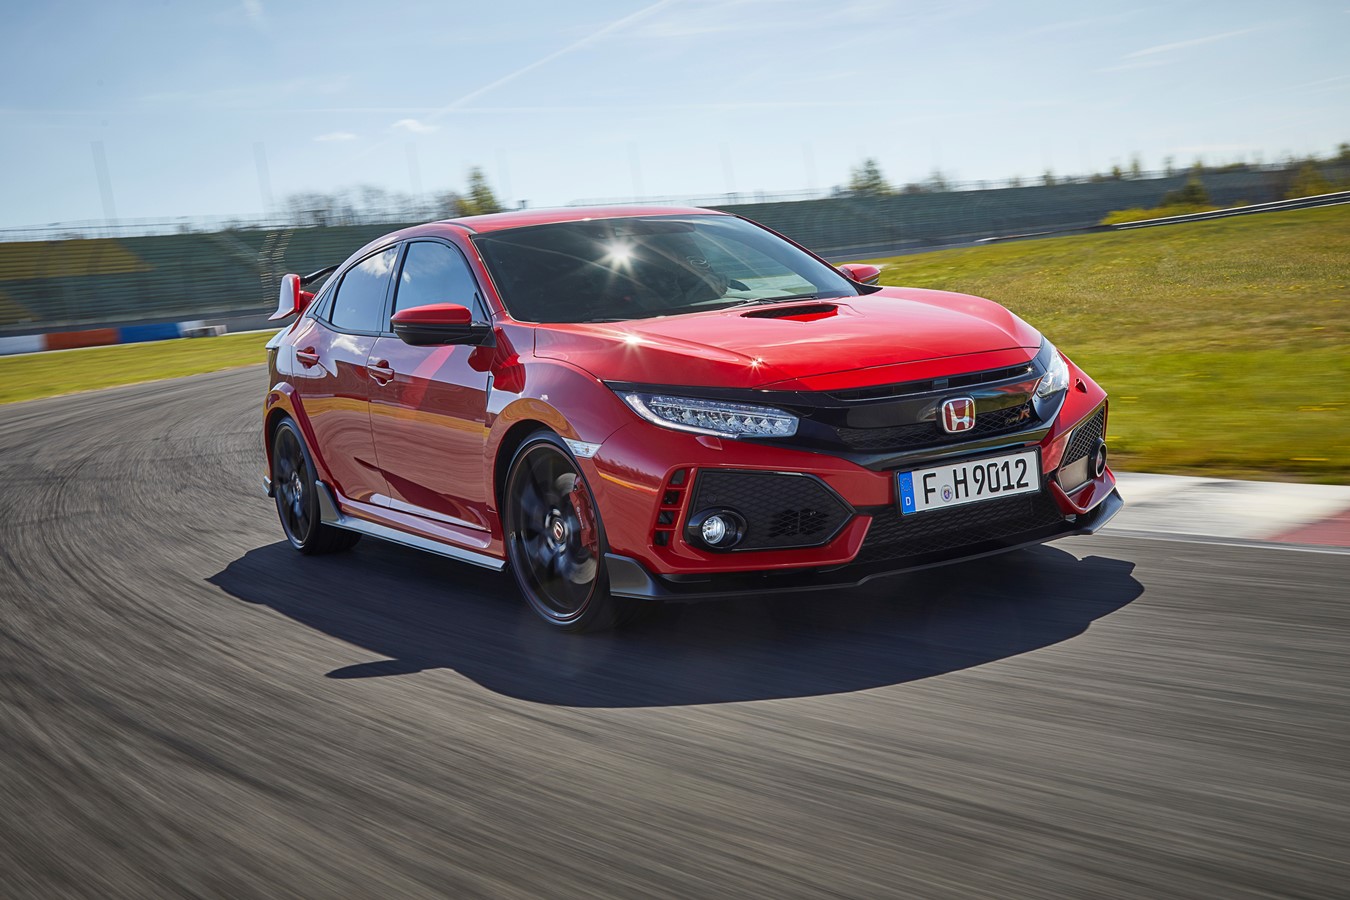 Civic Type R wins BBC TopGear Magazine Car of the Year 